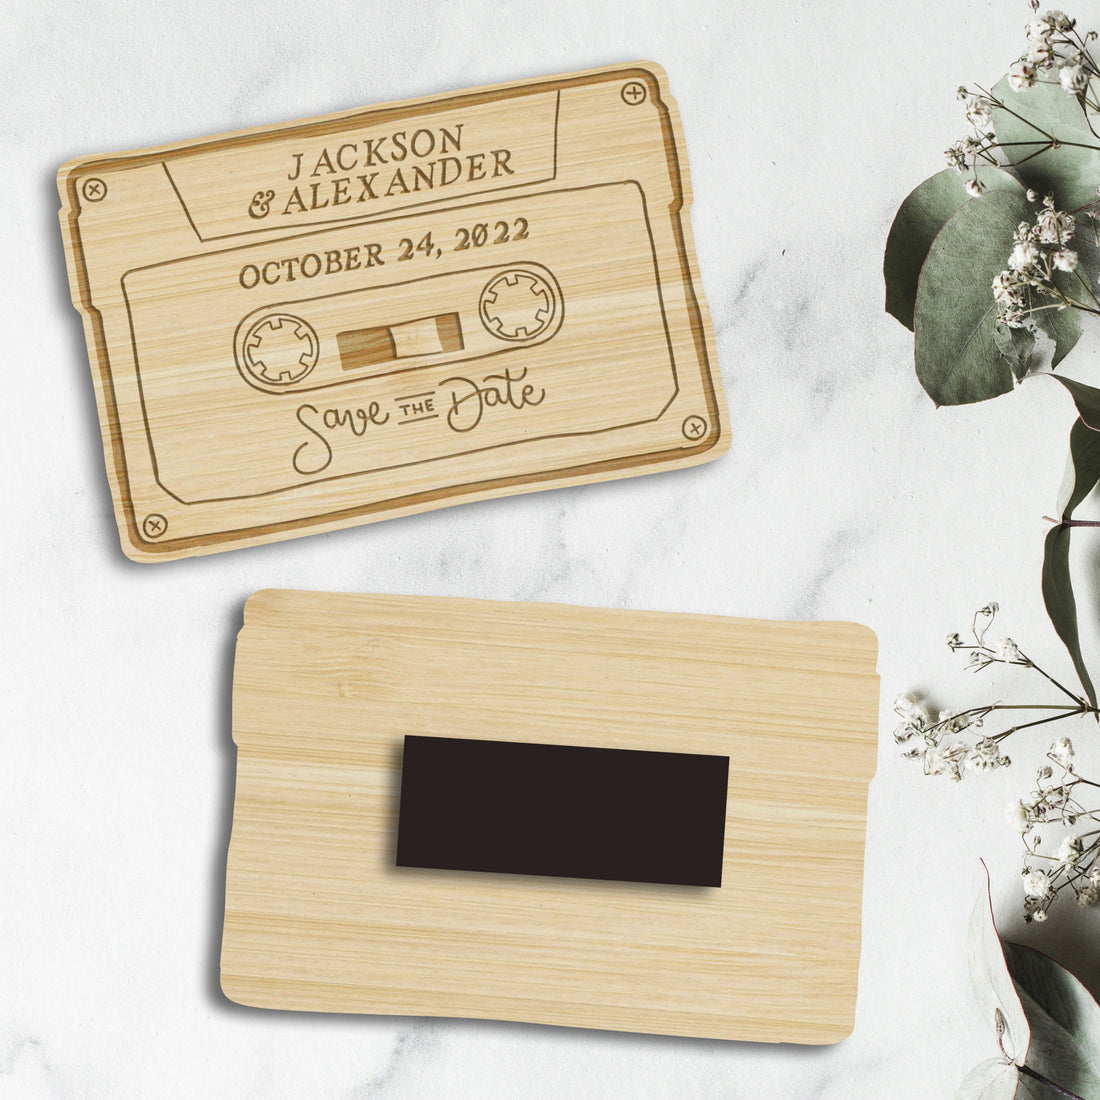 Engraved Wooden/ Acrylic Save The Date Cassette Fridge Magnets, Personalised Rustic Wedding Invitation Post Card, Remember Date Announcement Guest Gift Tags